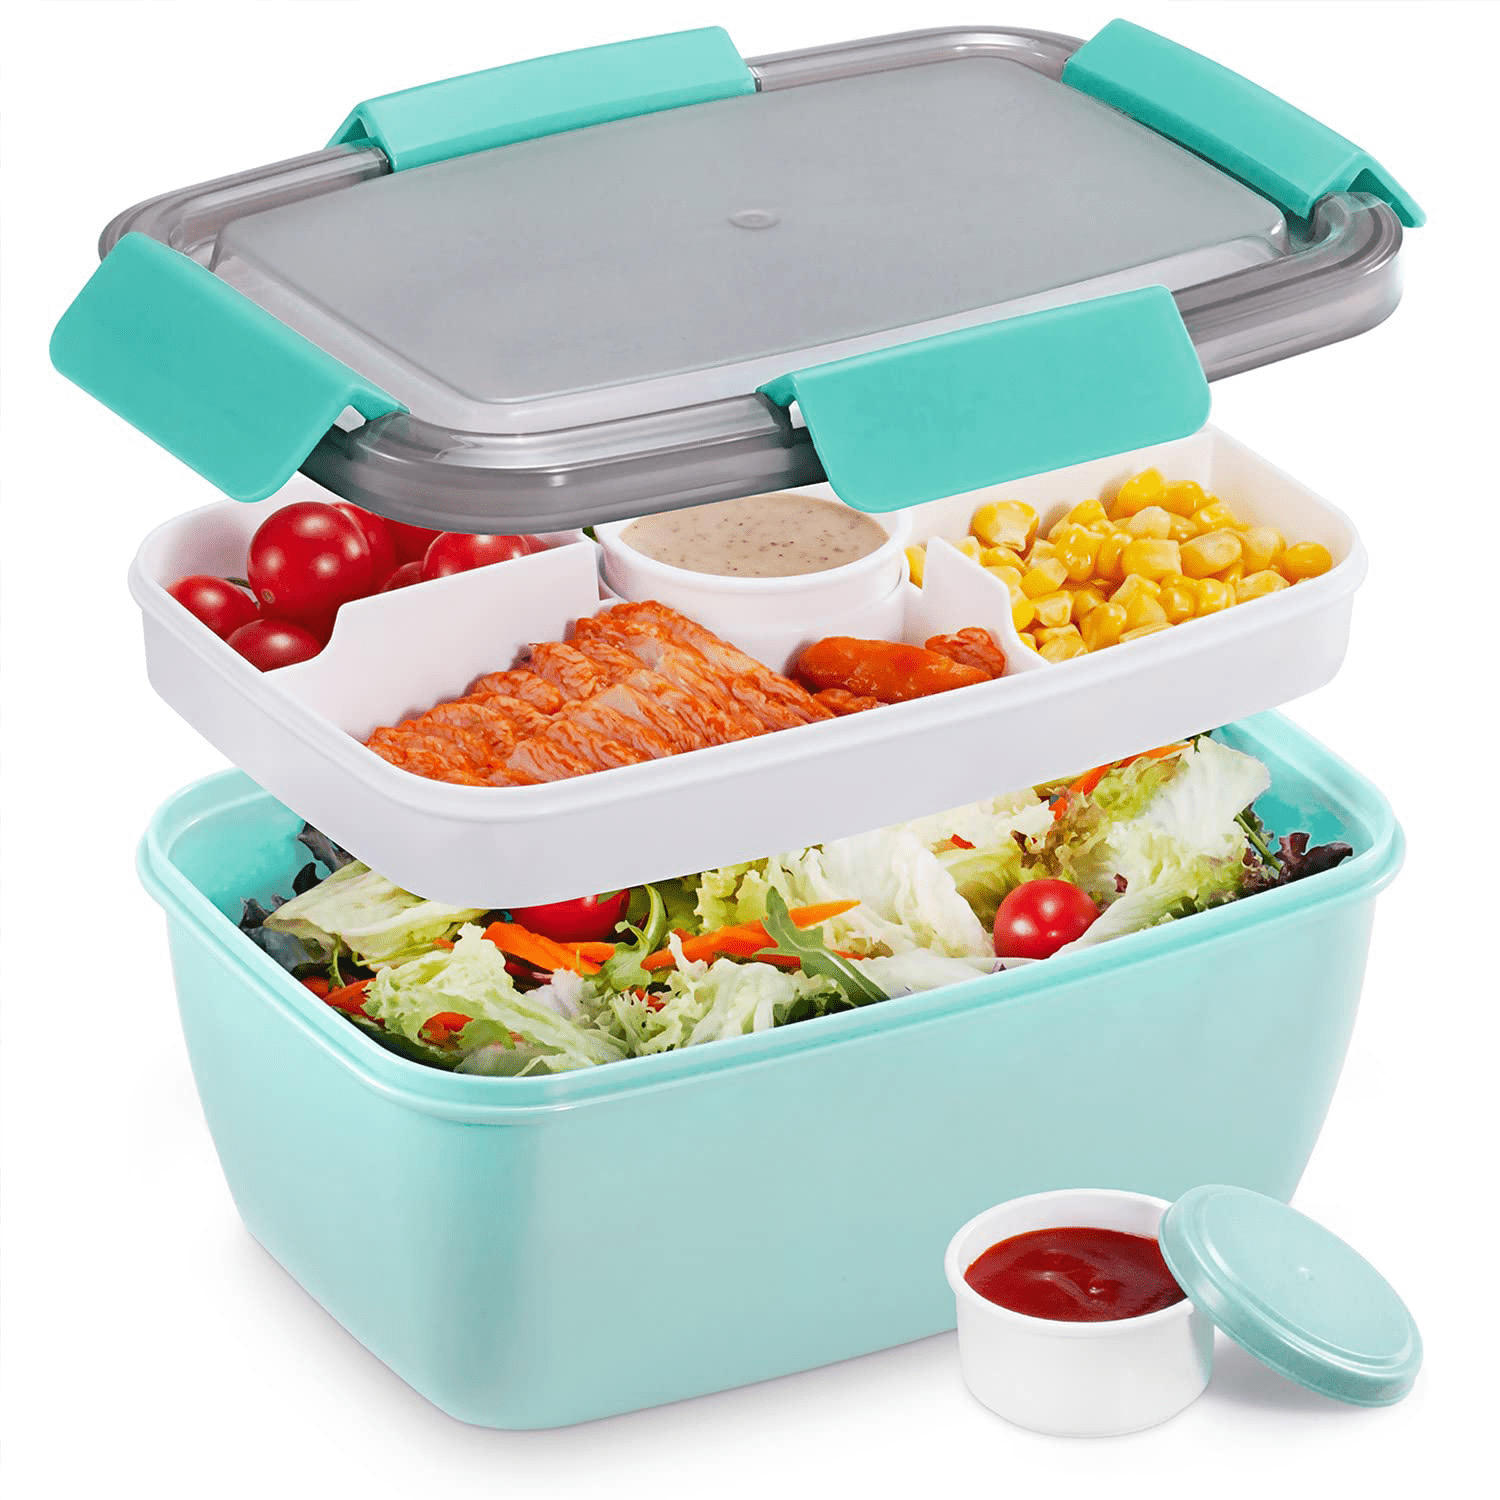 68-oz Salad Bento Box for Adults and Kids,Bento Lunch Box 68 oz Salad Bowl with 5-Compartment,Lunch Box Container with 1Pcs Salad Dressing Container